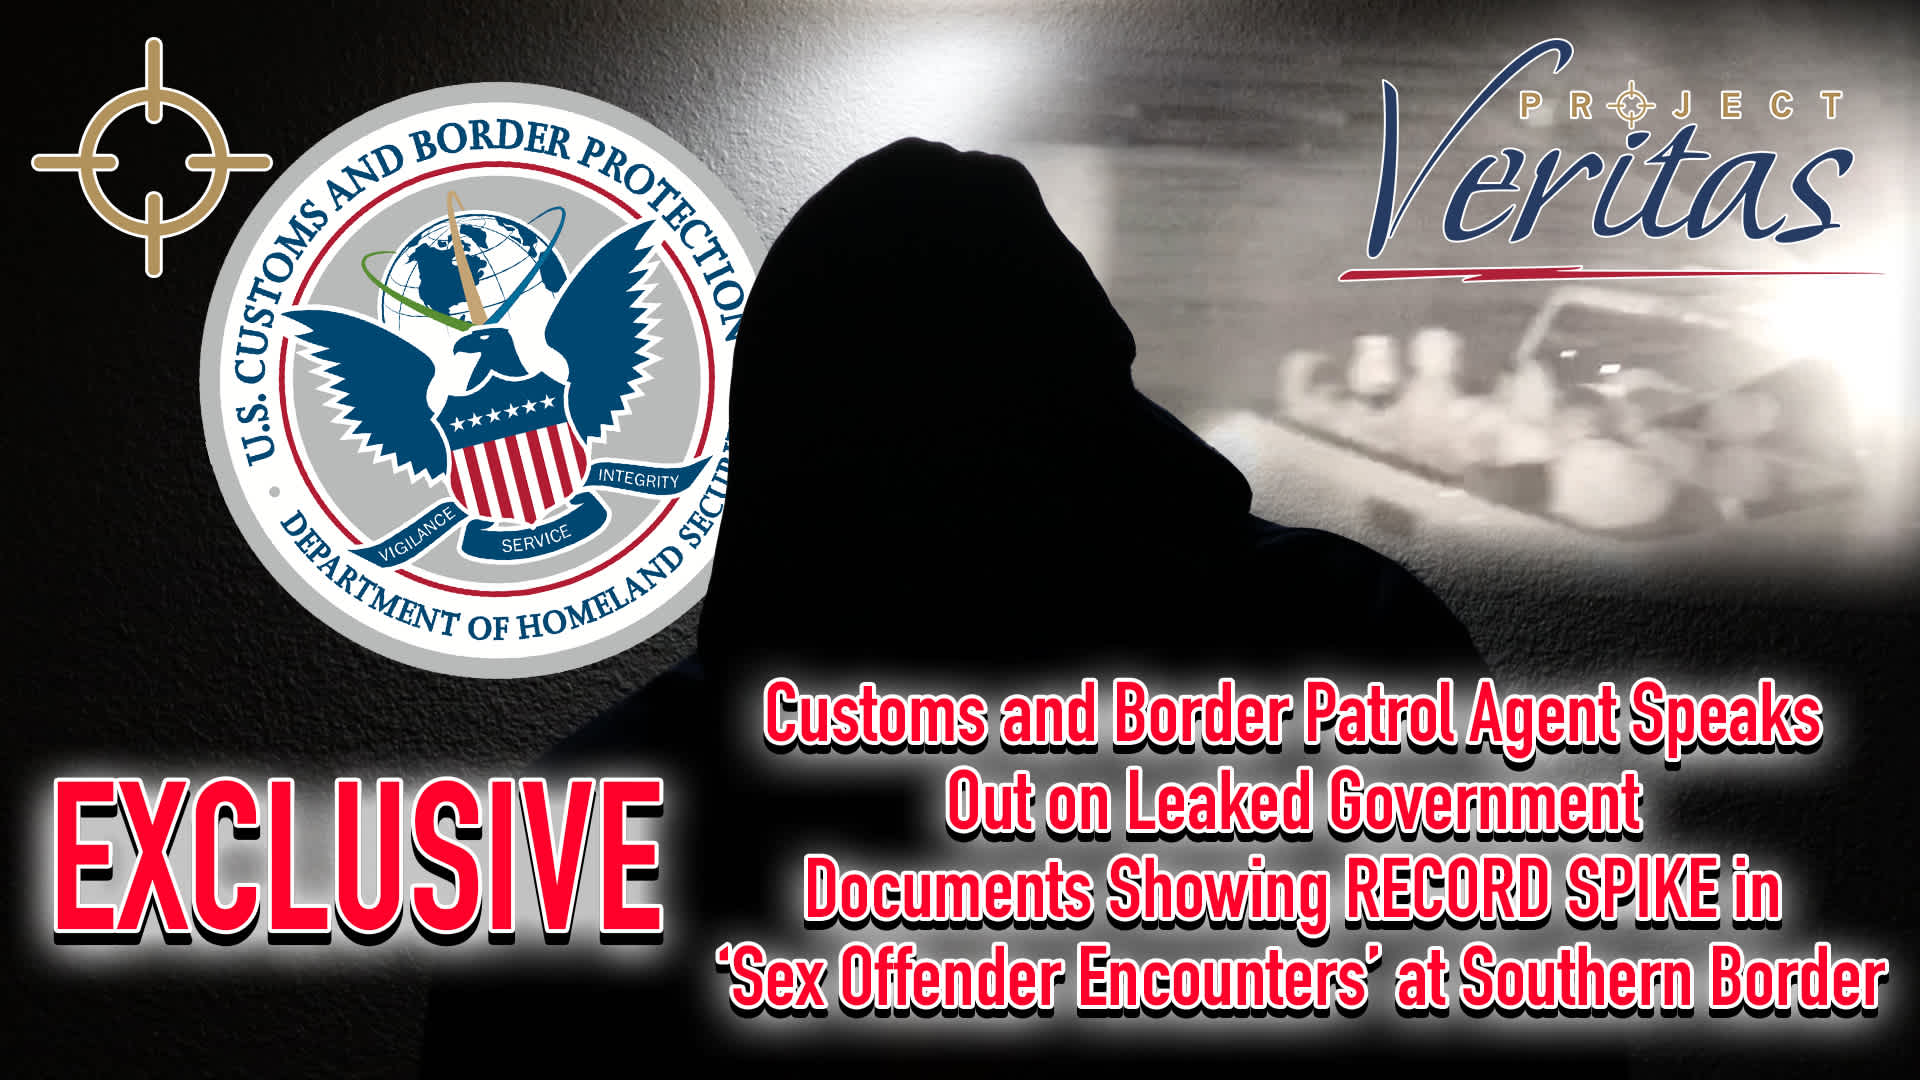 Exclusive Customs And Border Patrol Agent Speaks Out On Leaked Government Documents Showing